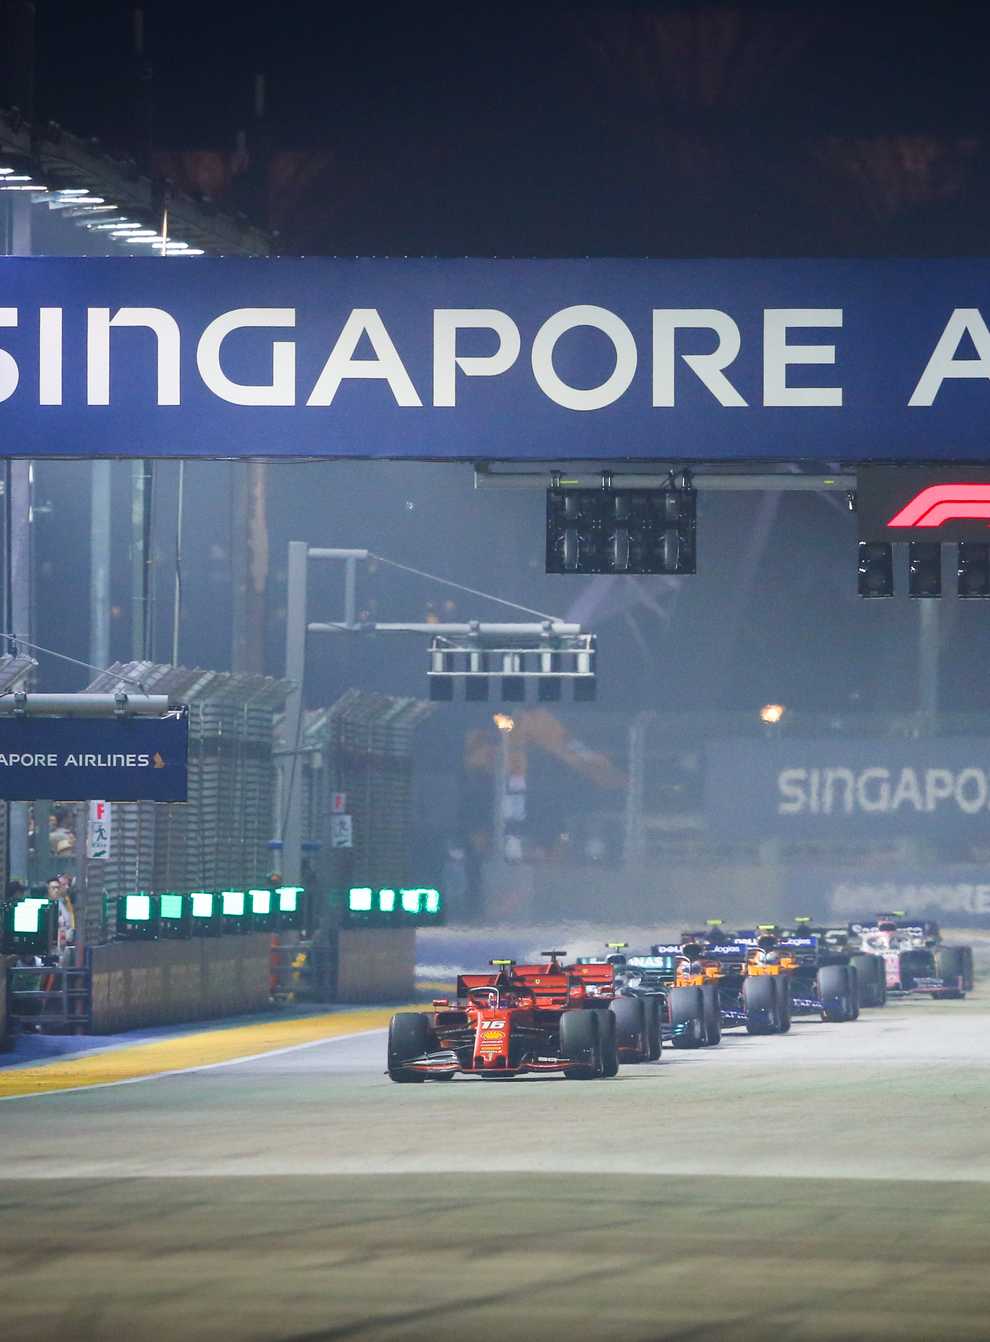 Singapore is one of the most coveted races of the F1 season